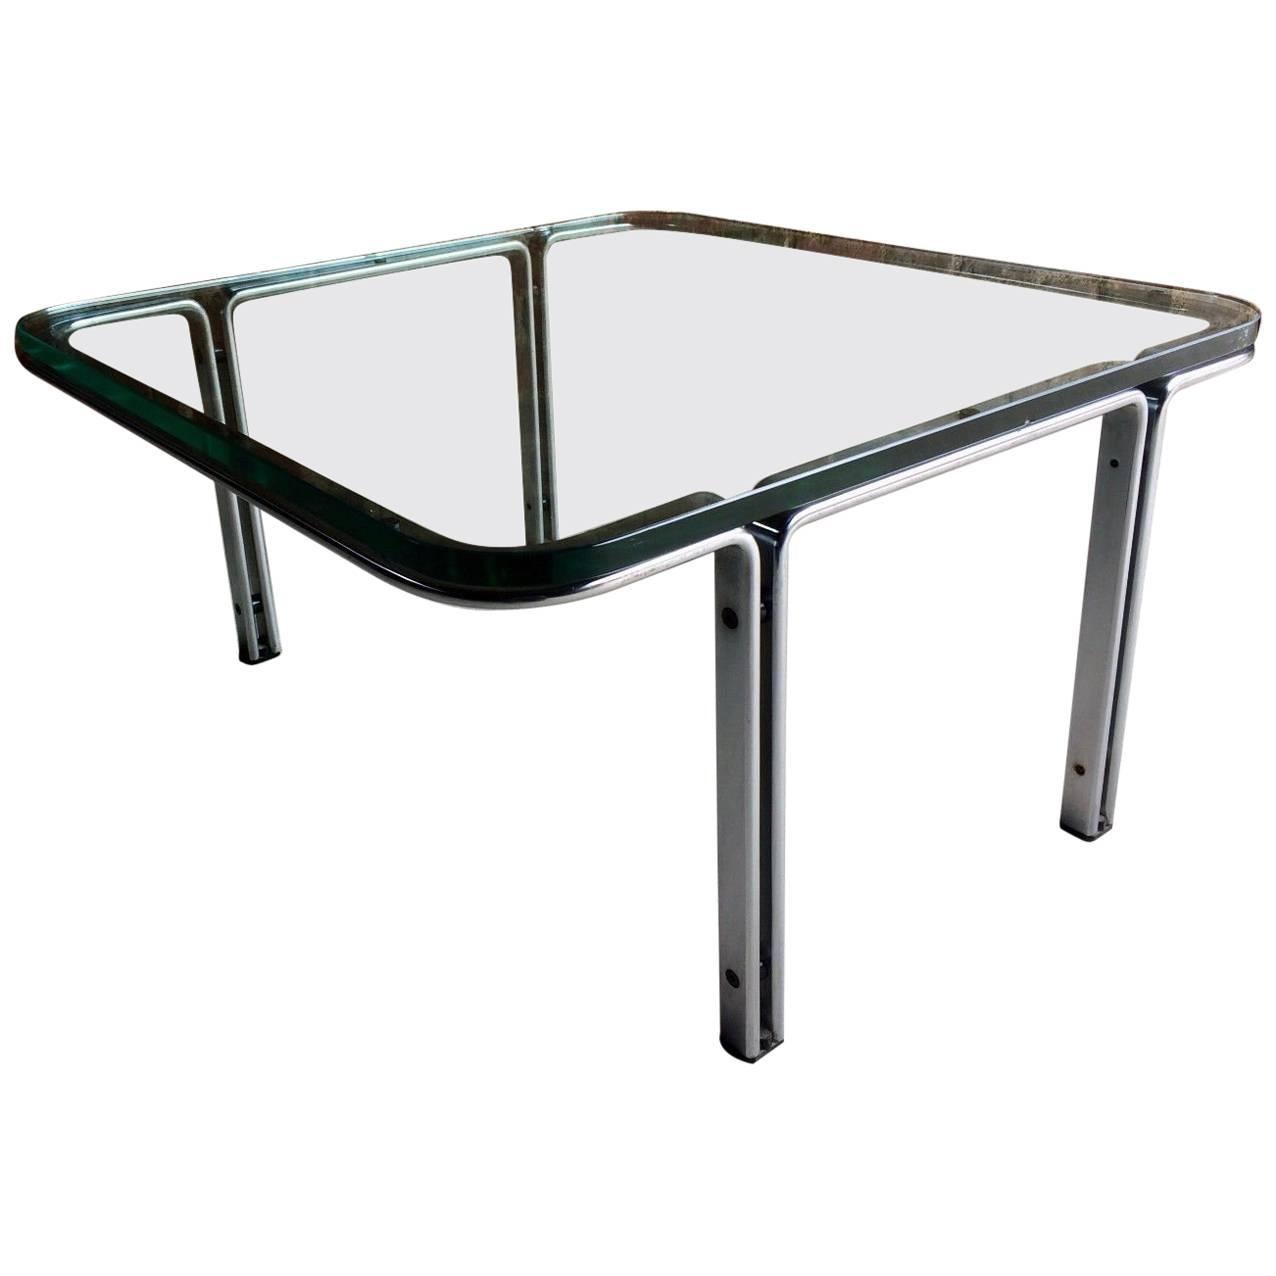 Horst Bruning Square Steel and Glass Coffee Table 1960s German Number 1